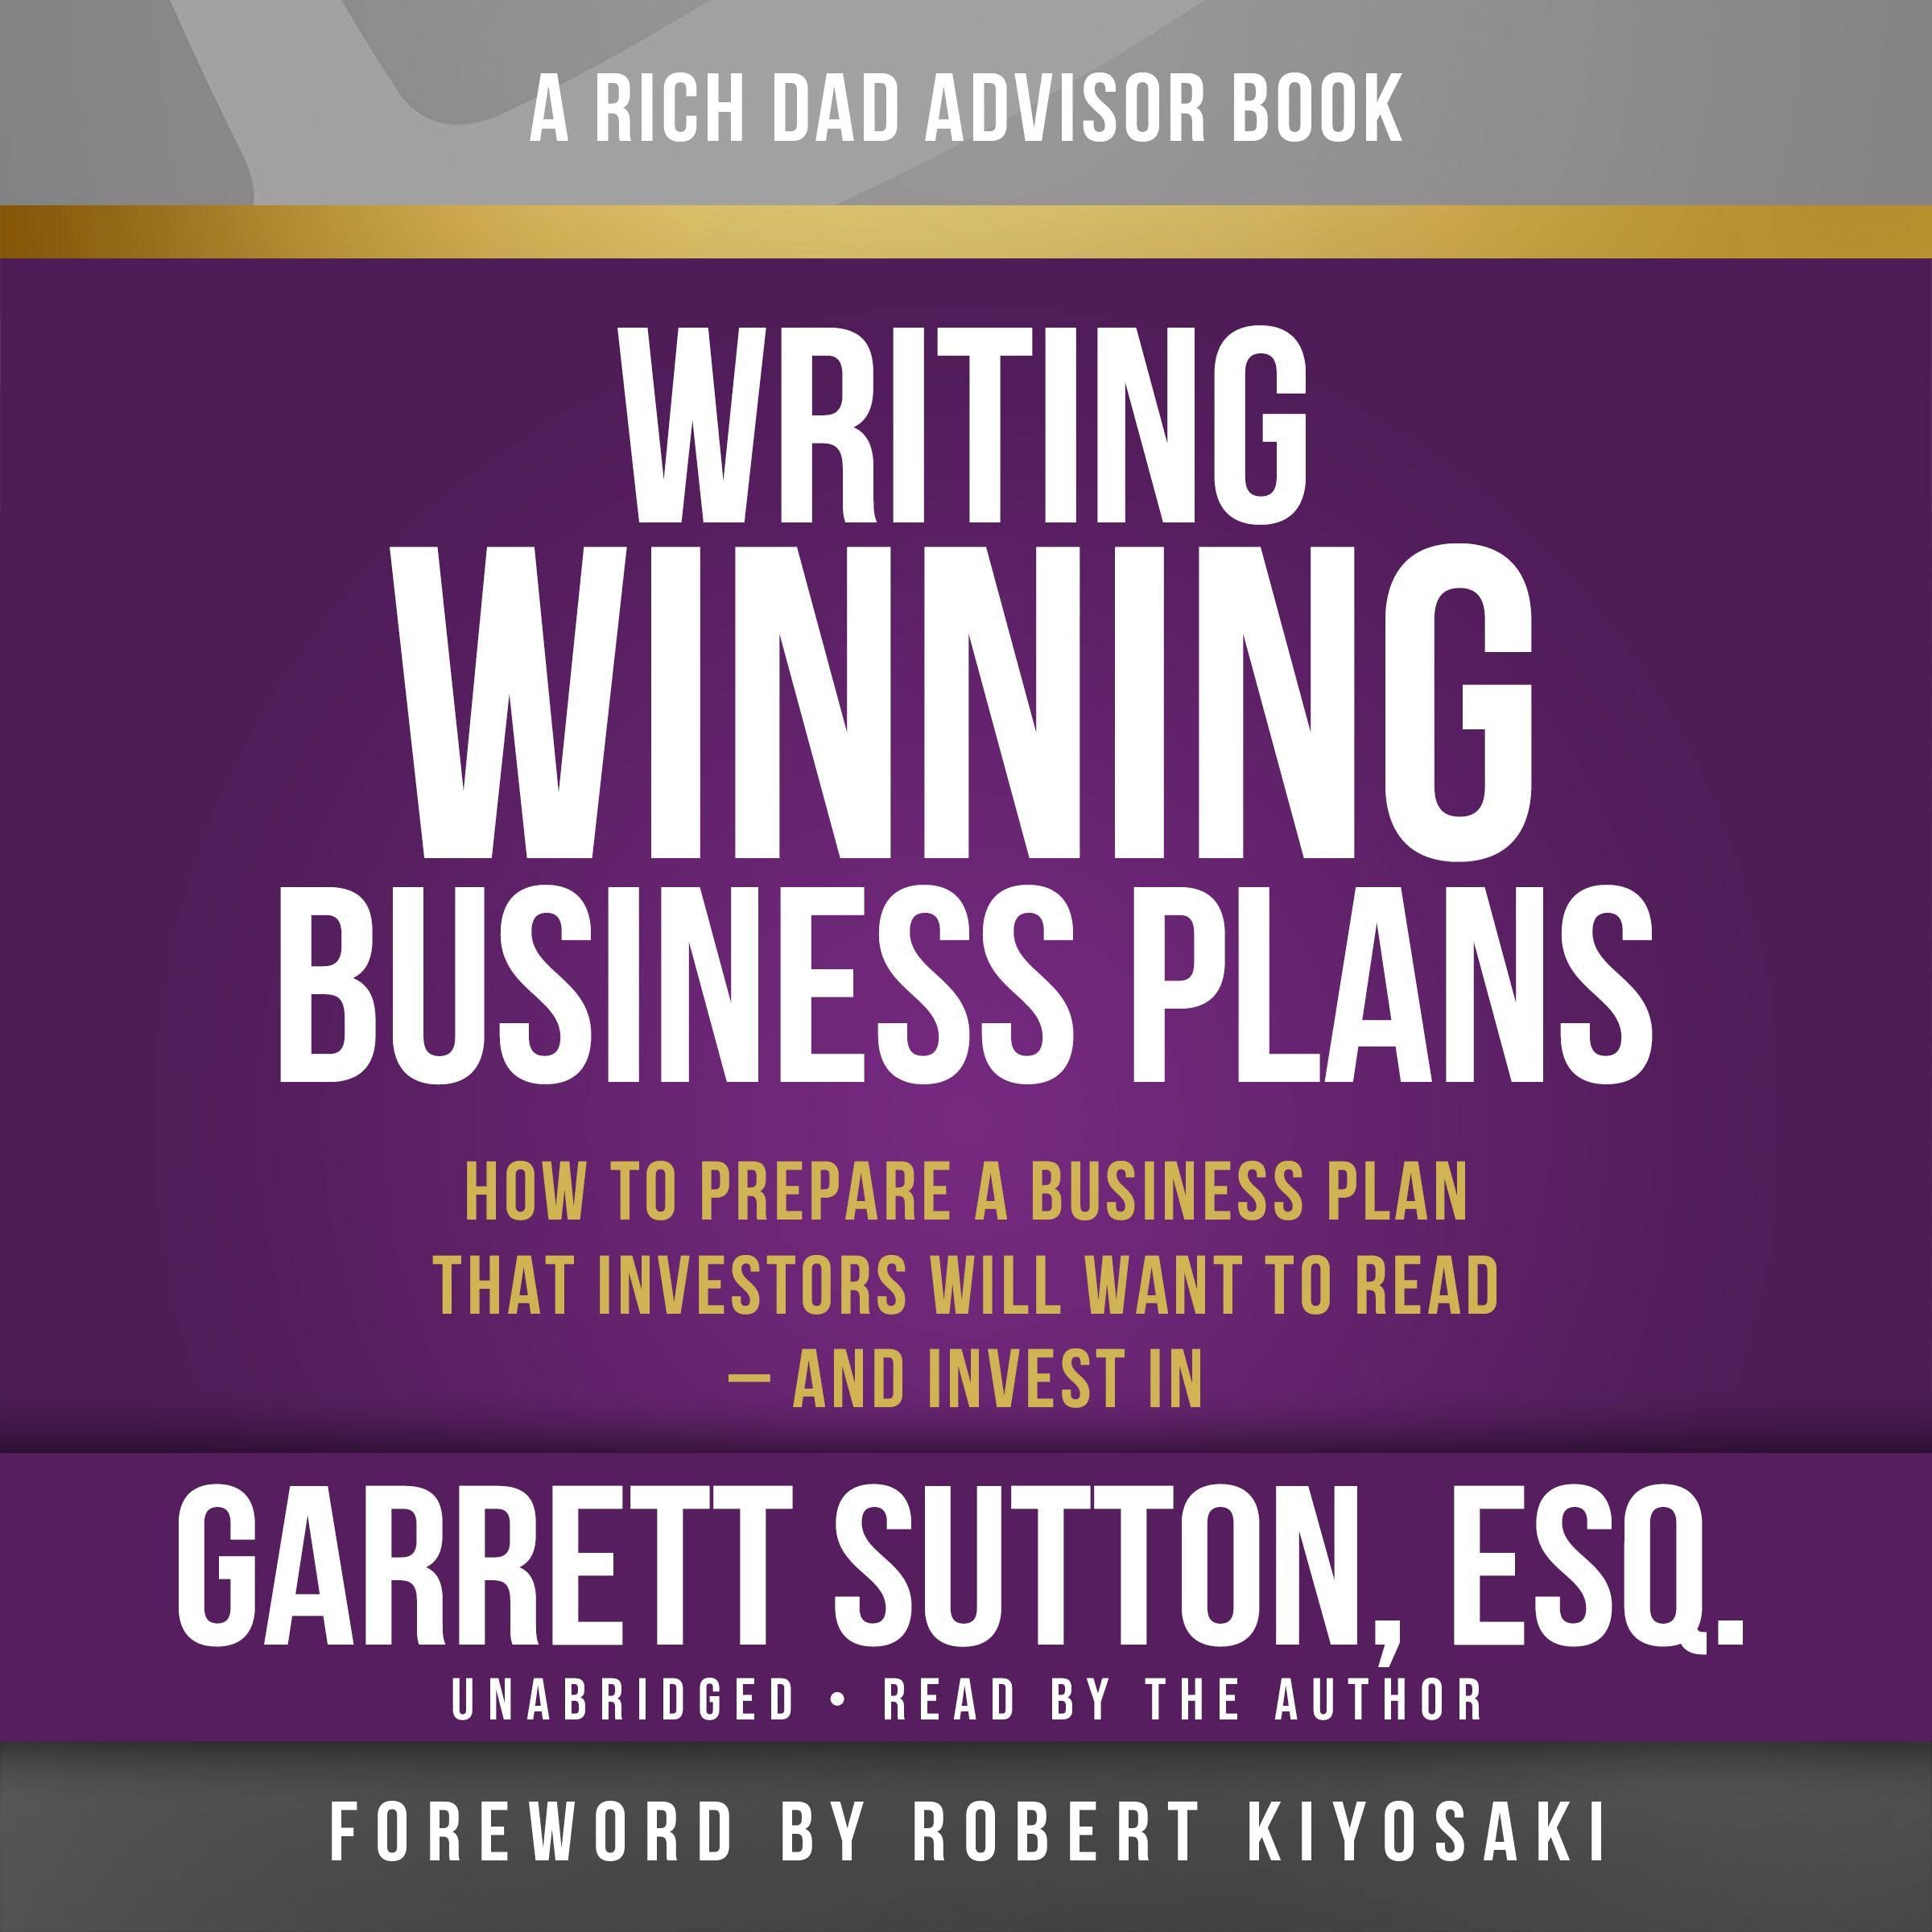 Rich Dad Advisors: Writing Winning Business Plans: How to Prepare a Business Plan That Investors Will Want to Read - and Invest In